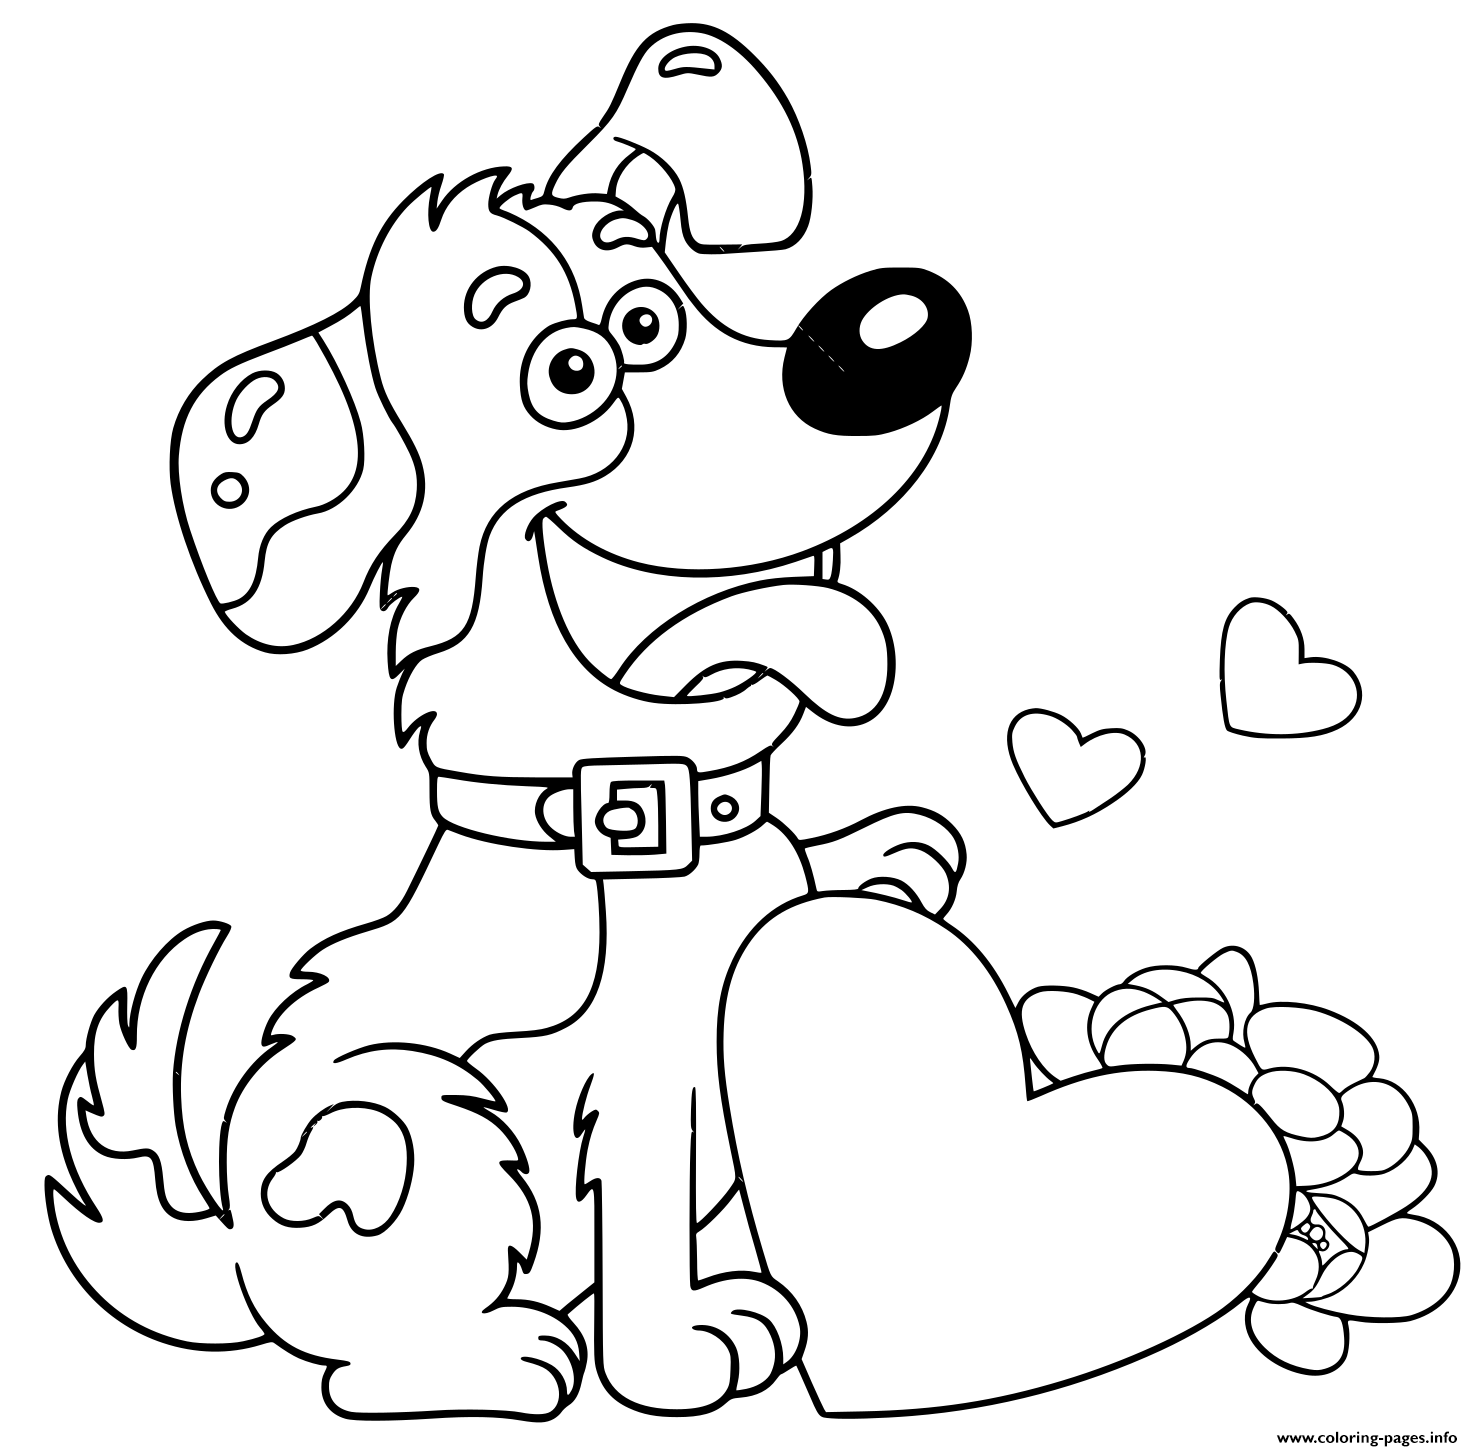 Cartoon Dog With Flowers And Heart Greeting Card Birthday Valenti coloring